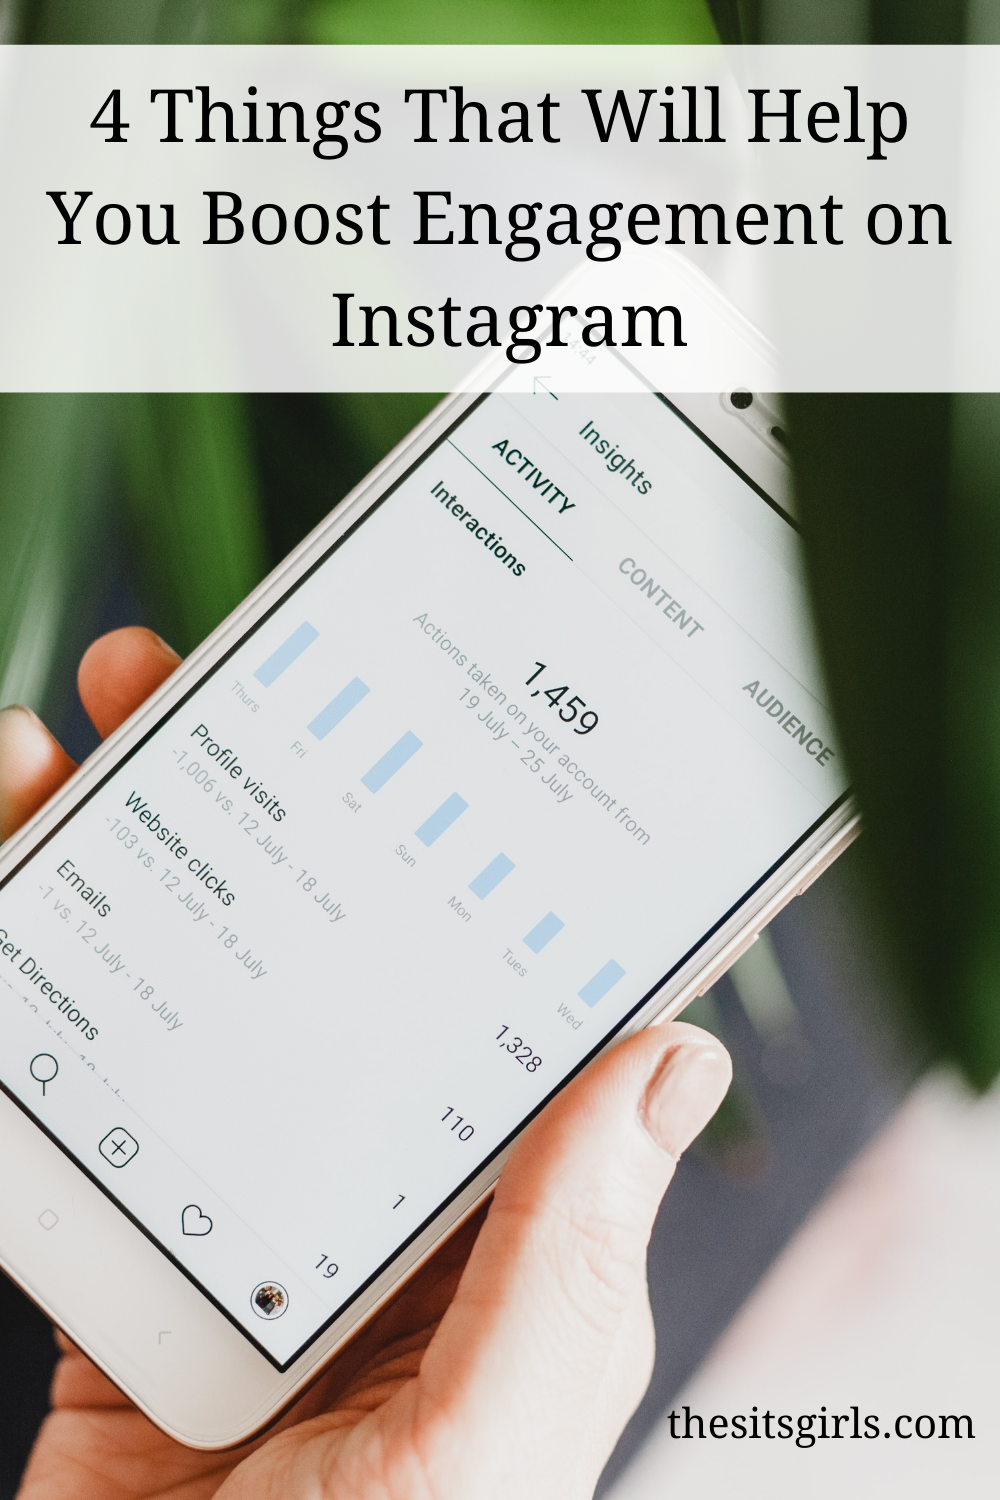 Hand holding a cell phone with Instagram insights showing on the screen under the words 4 things that will help you boost engagement on Instagram.